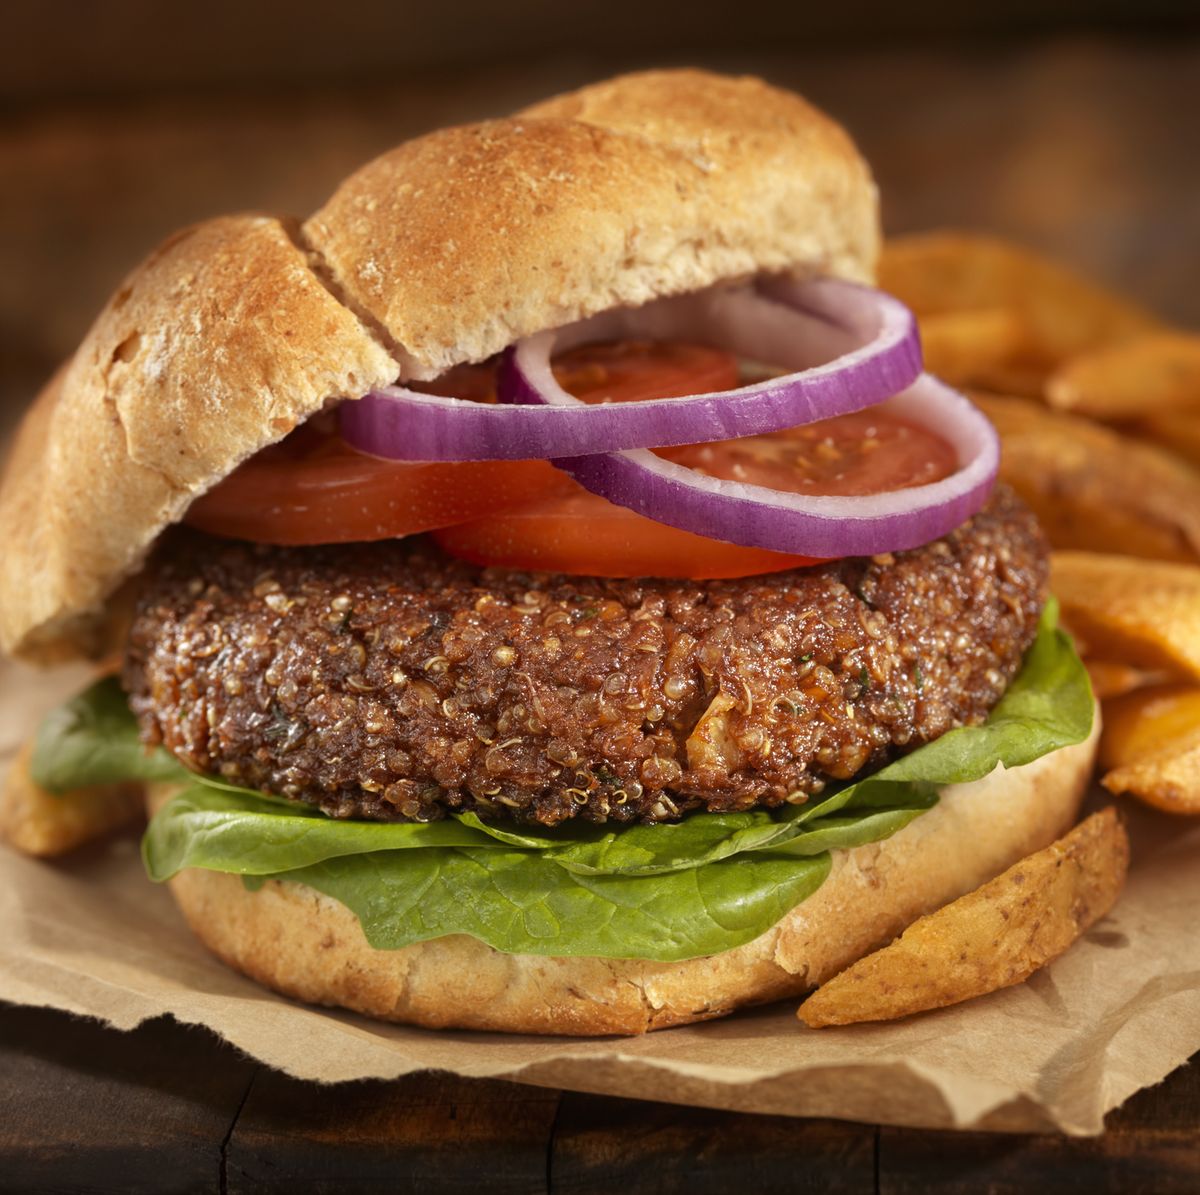 New Beyond Meat patty in stores this week